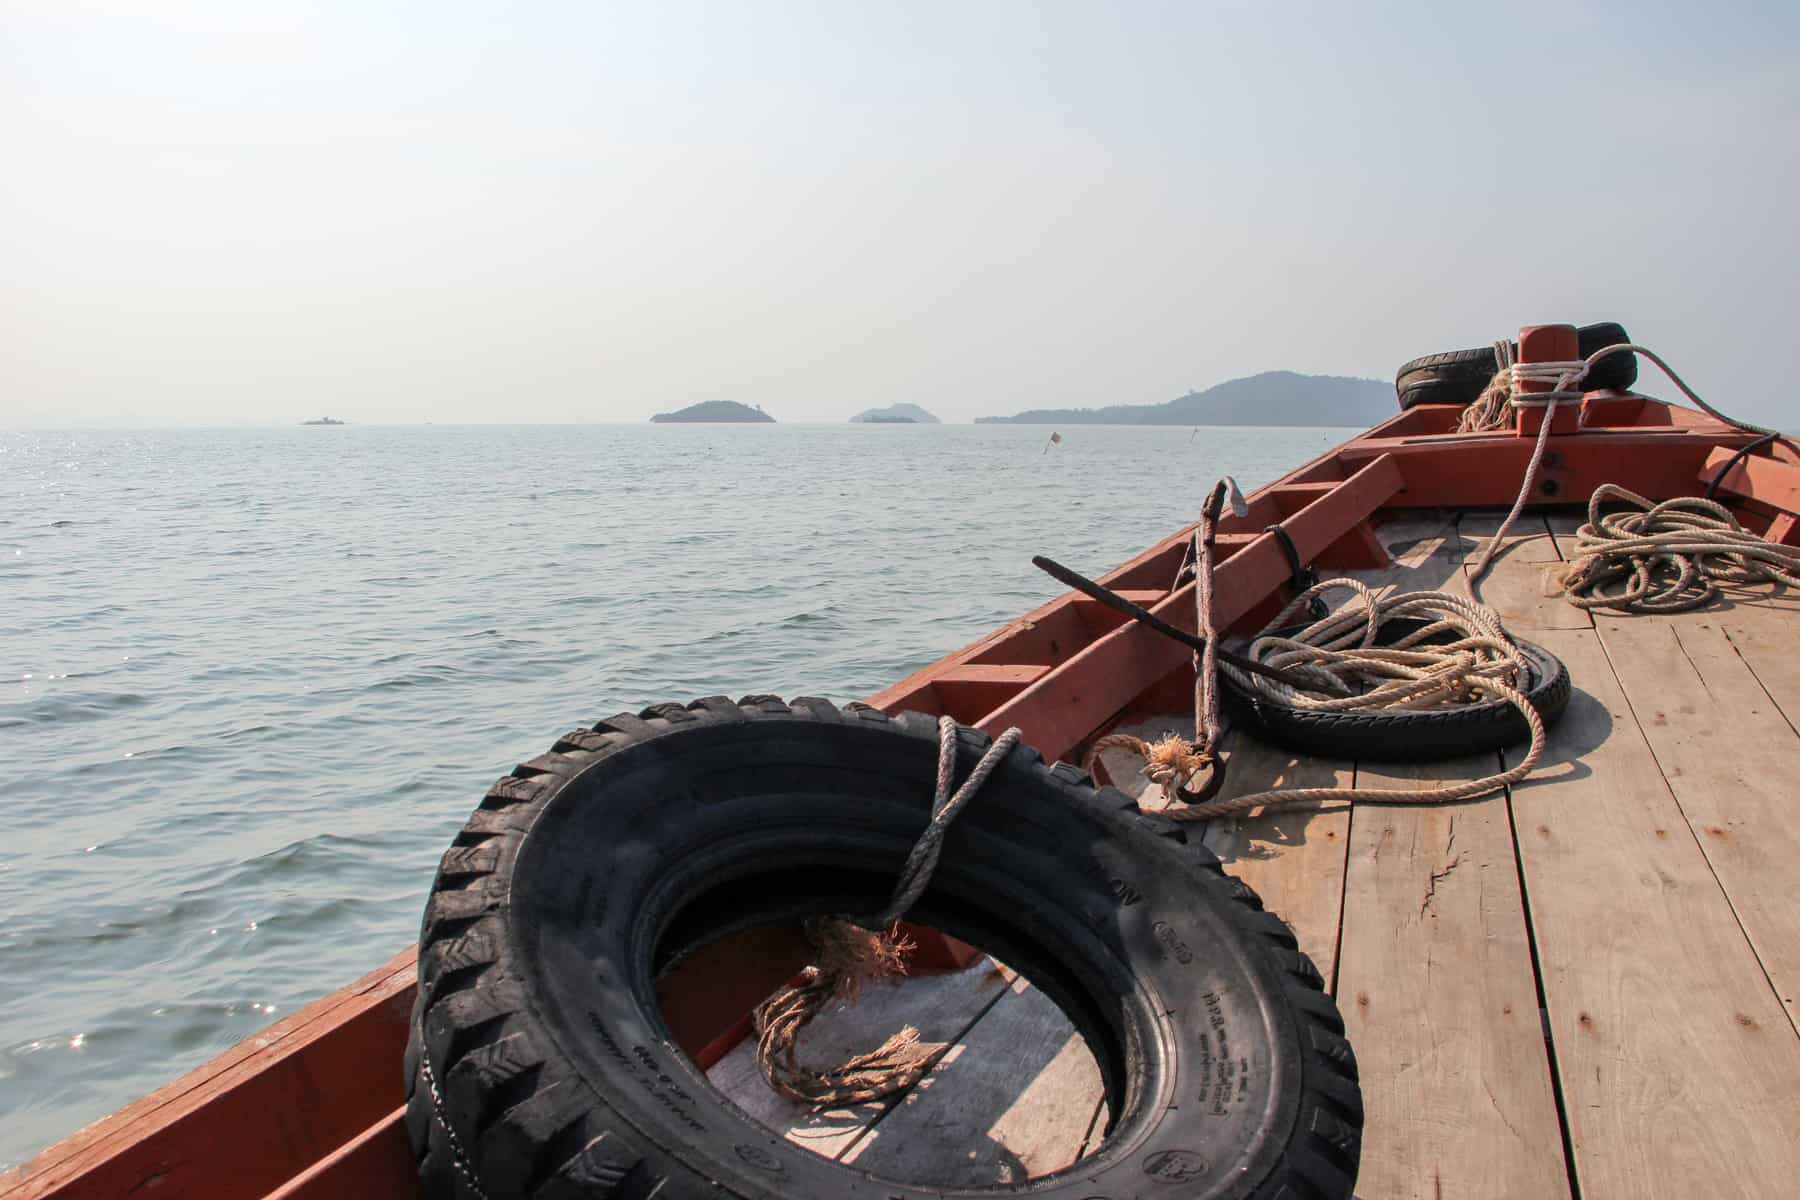 A wooden boat with black tyres as floats heading towards Rabbit Island in the background